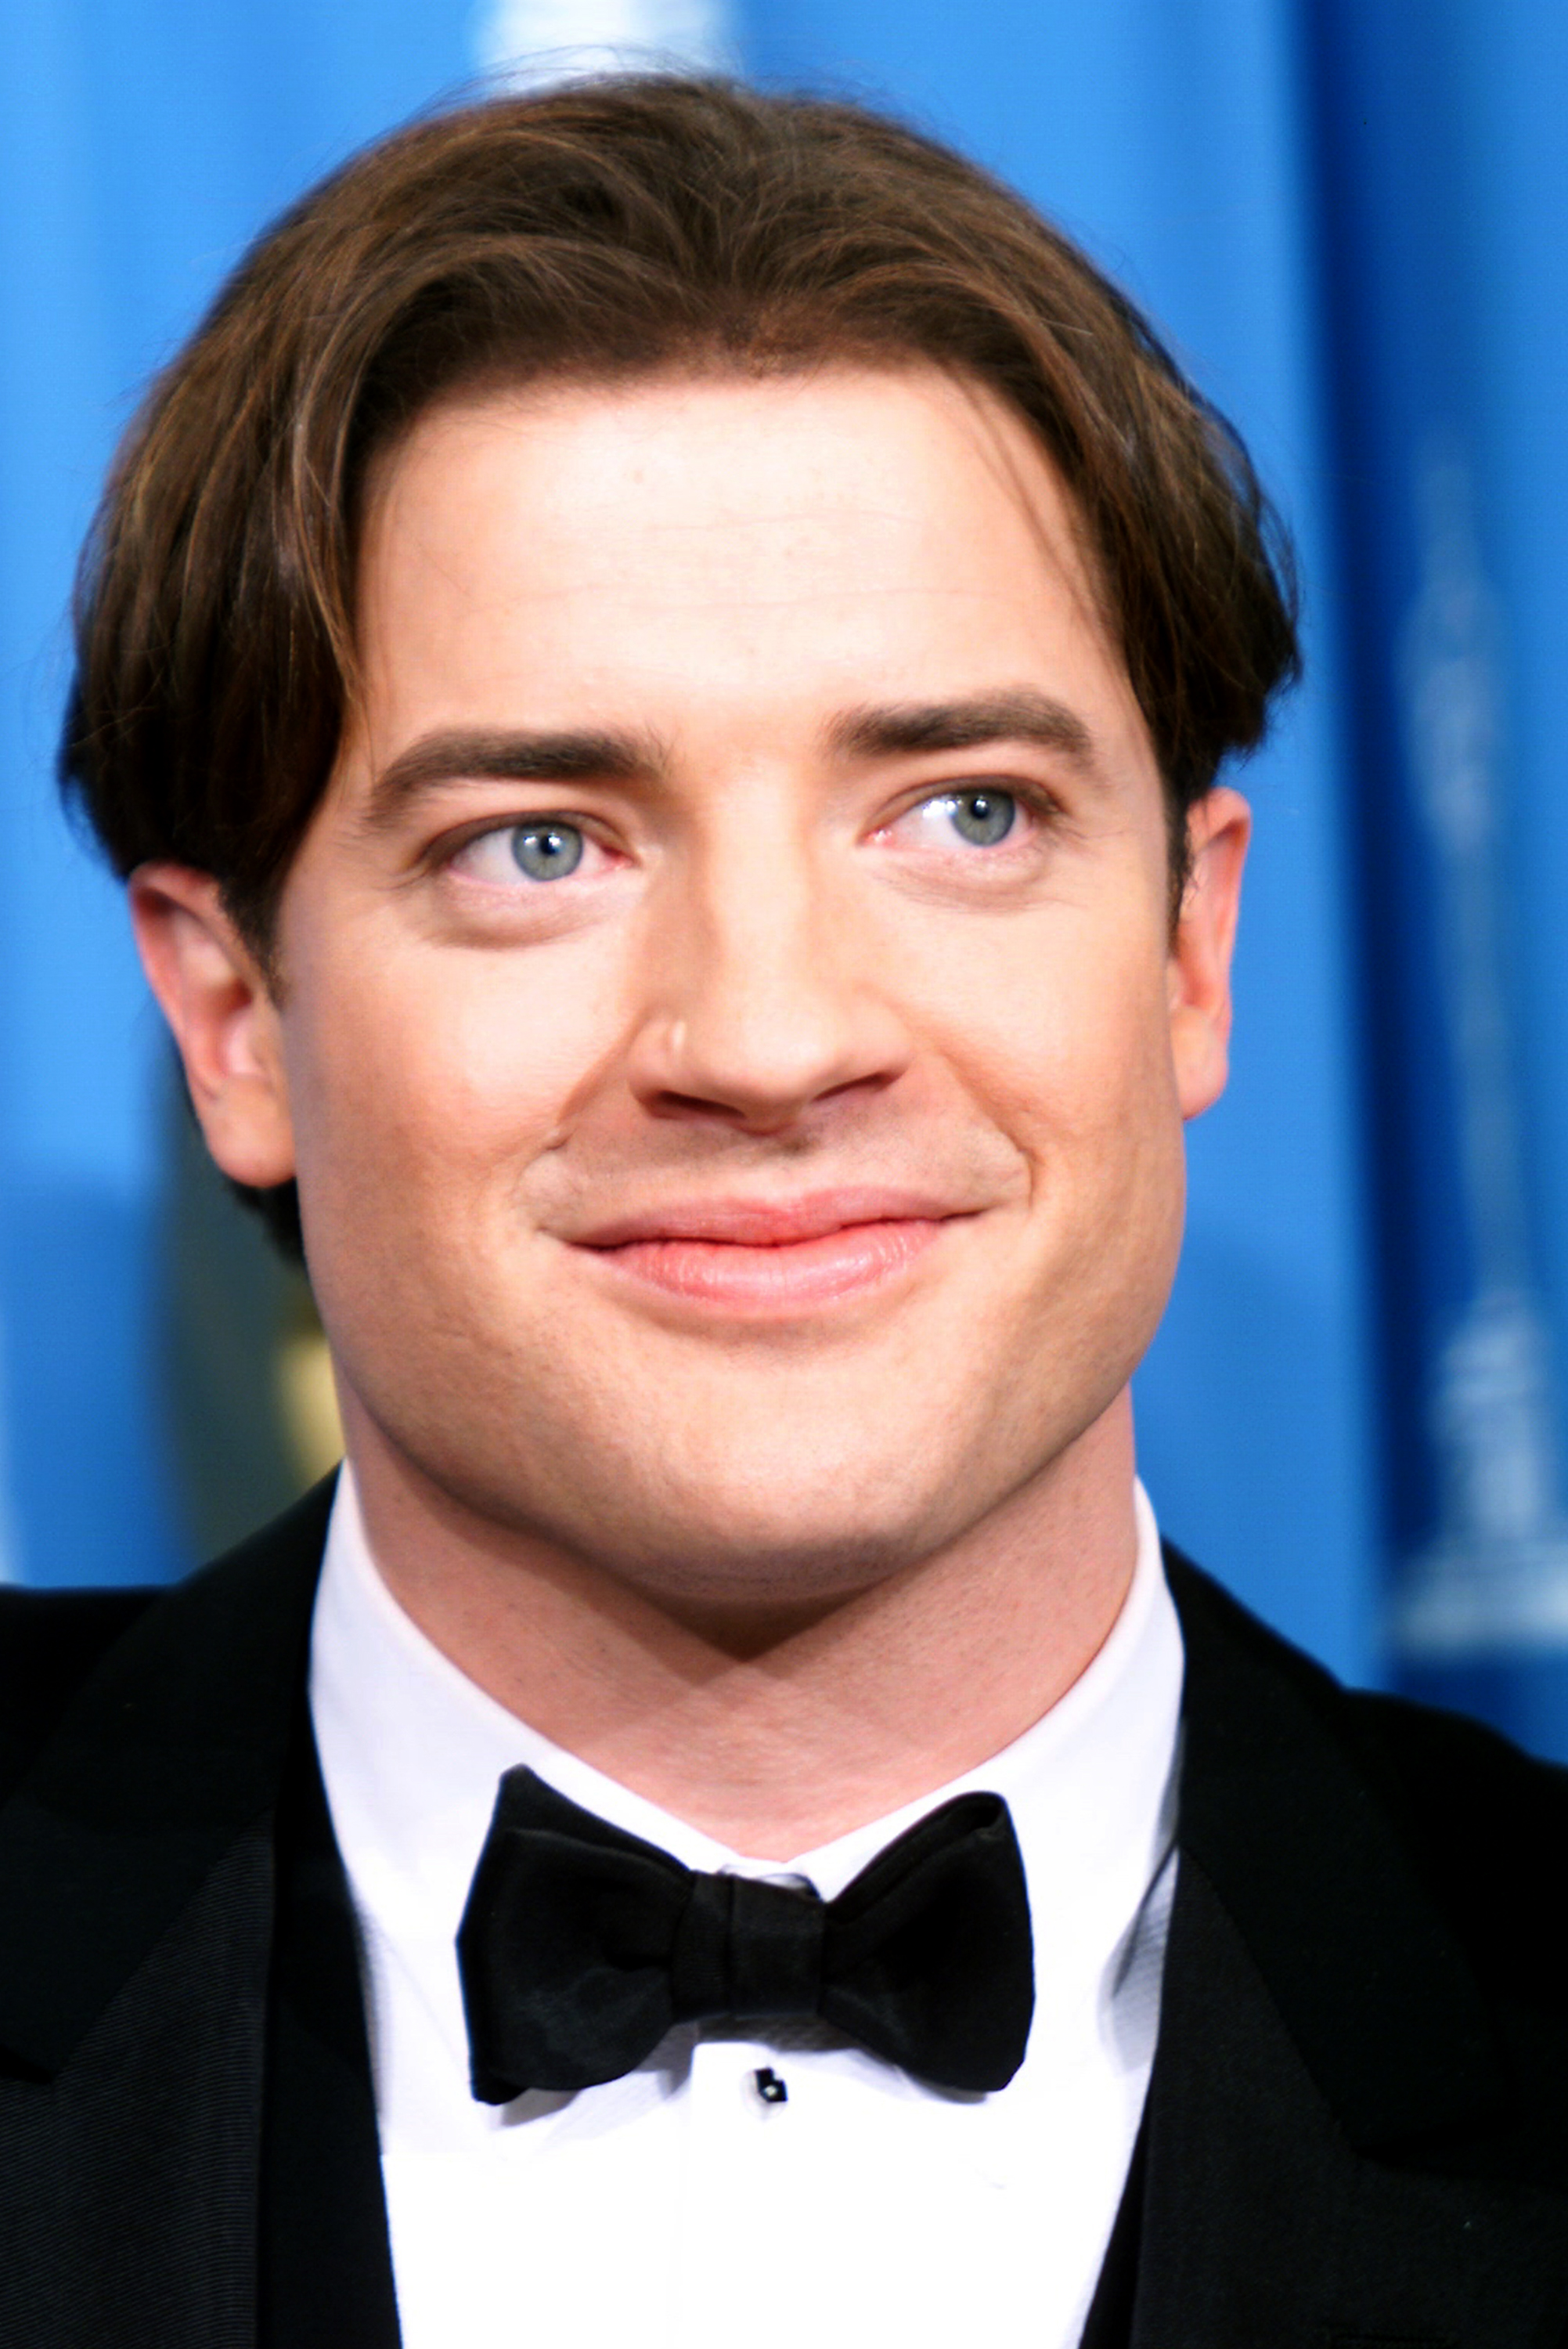 Brendan Fraser at the 71st Annual Academy Awards, March 21, 1999 In Los Angeles, California | Source: Getty Images